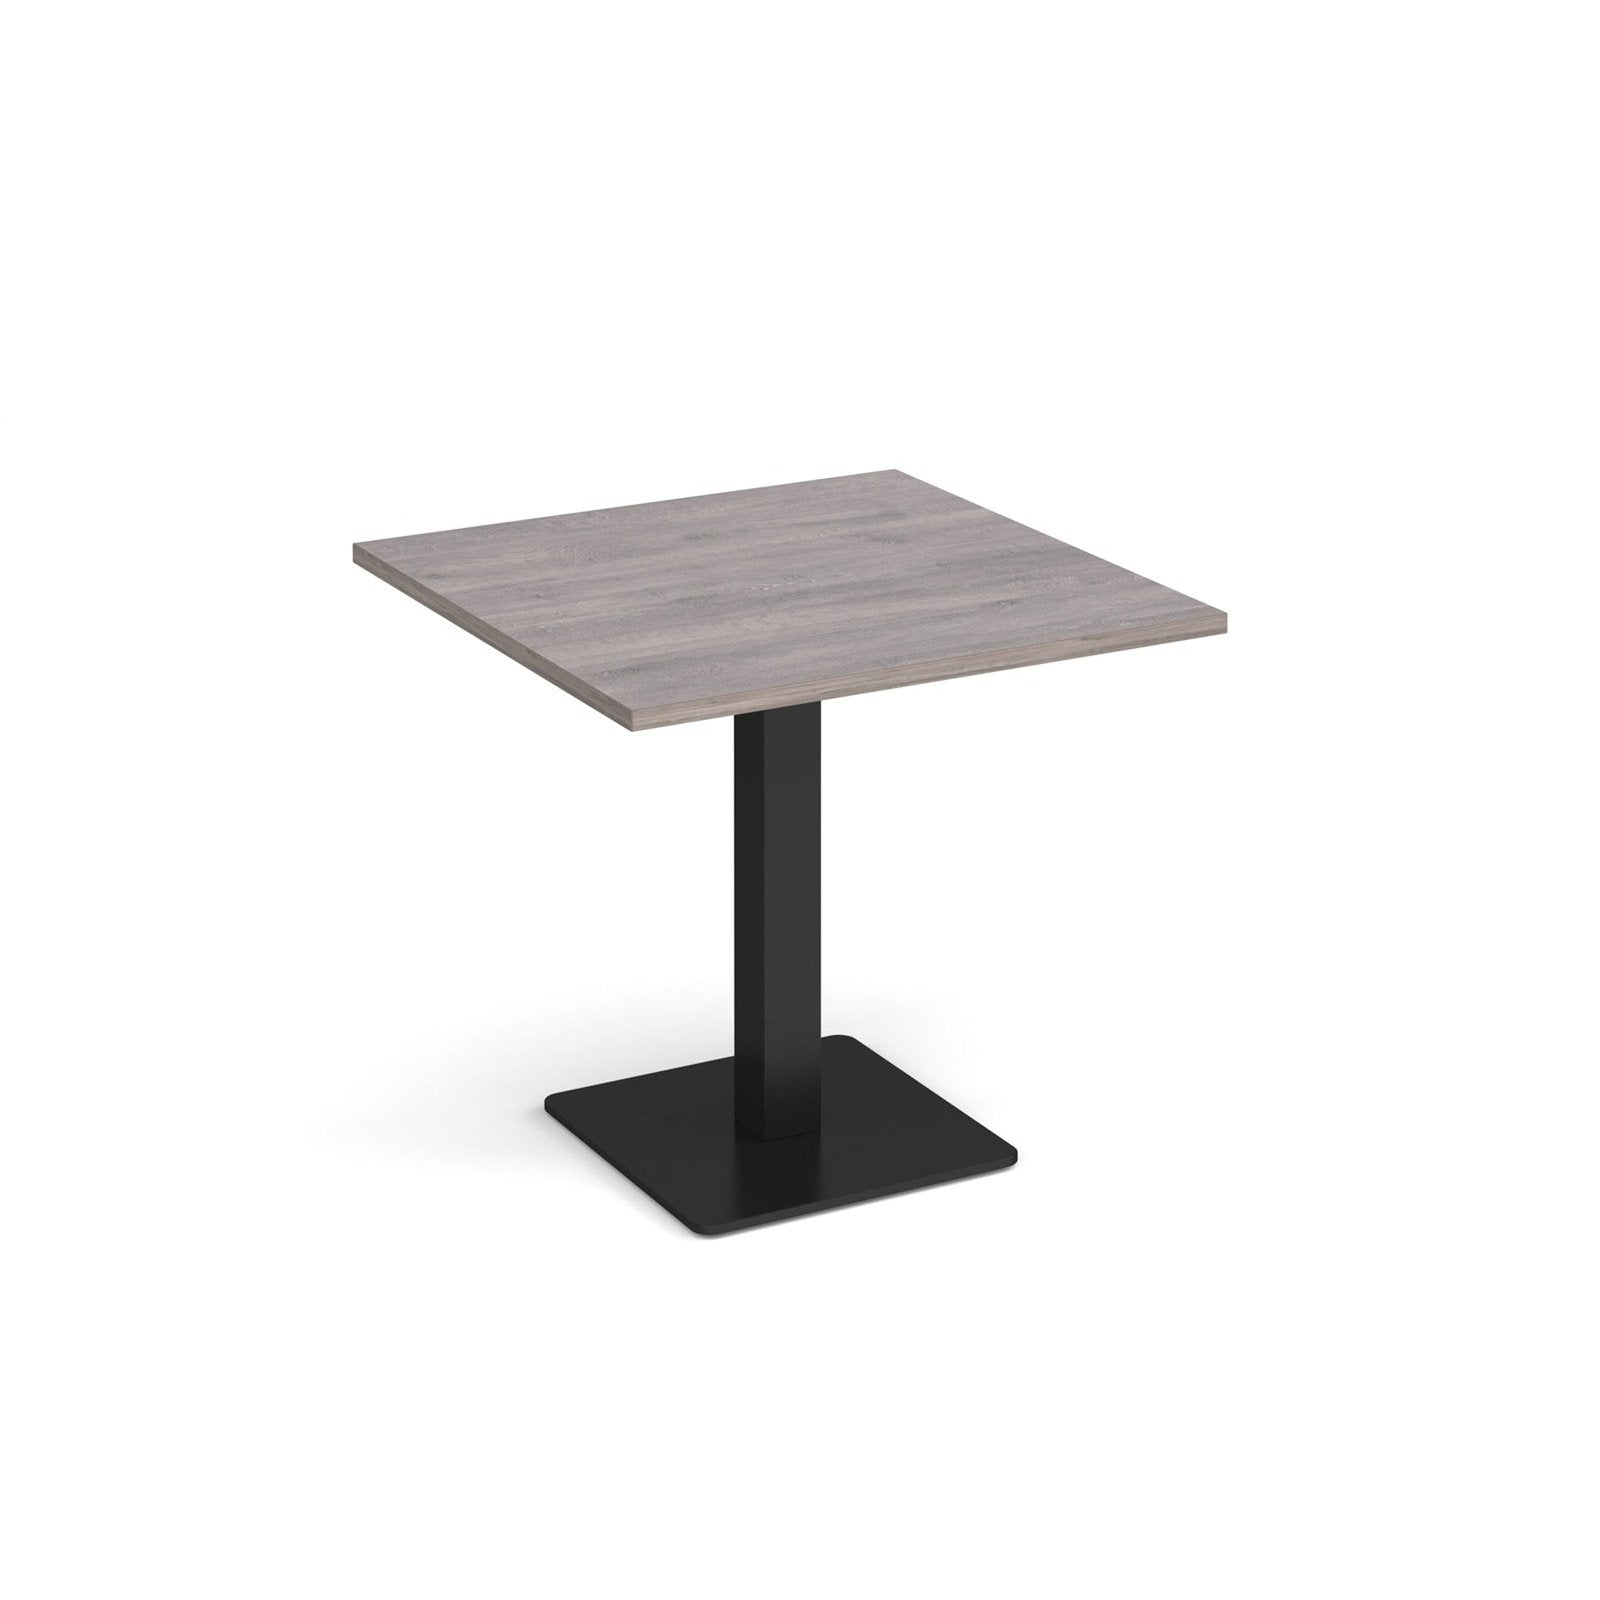 Brescia square dining table - Office Products Online